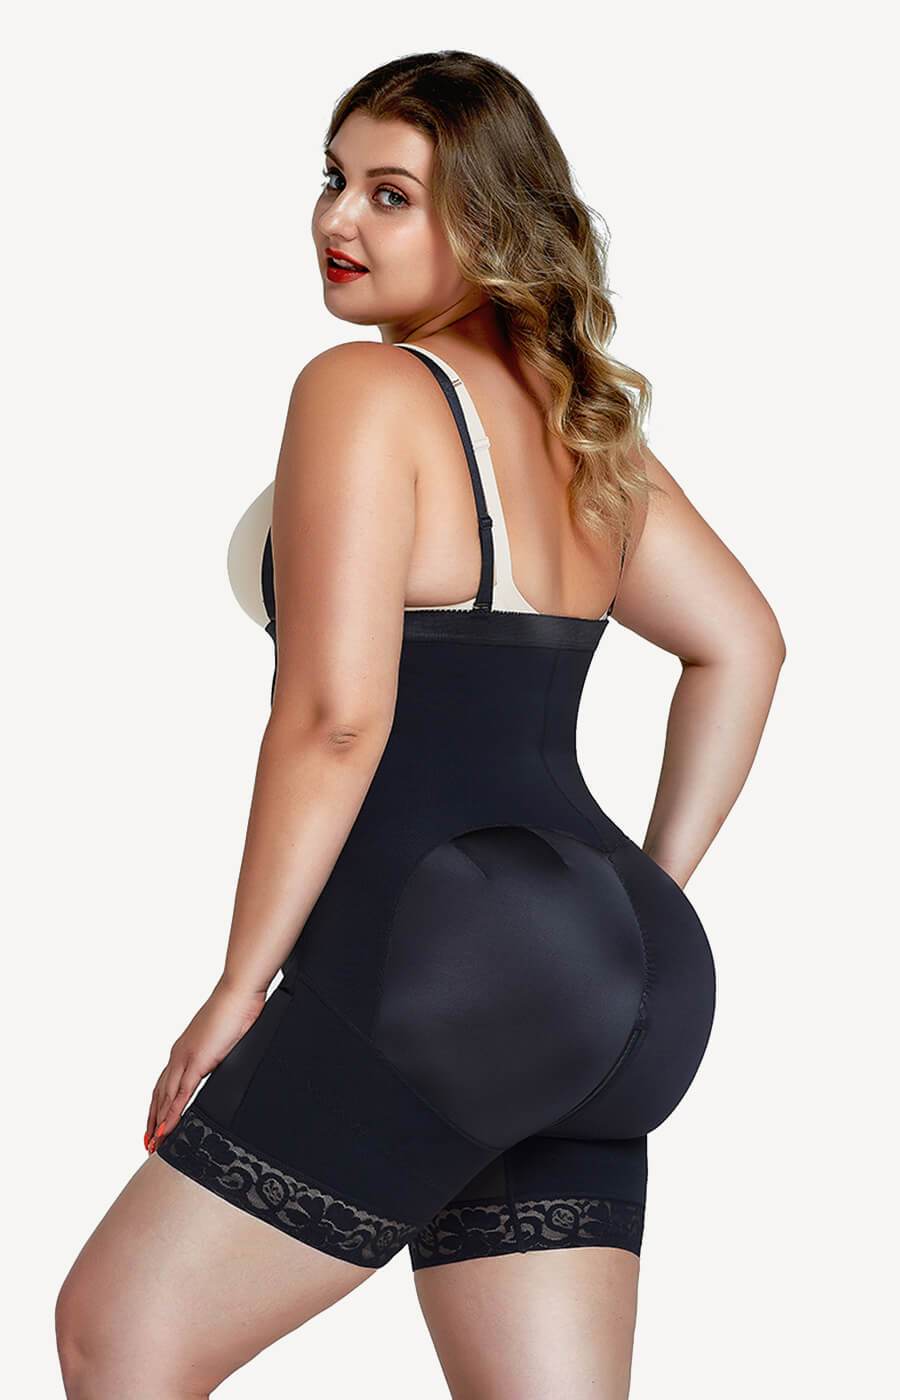 Shapellx Shapewear – Wear It Confidently and Comfortably